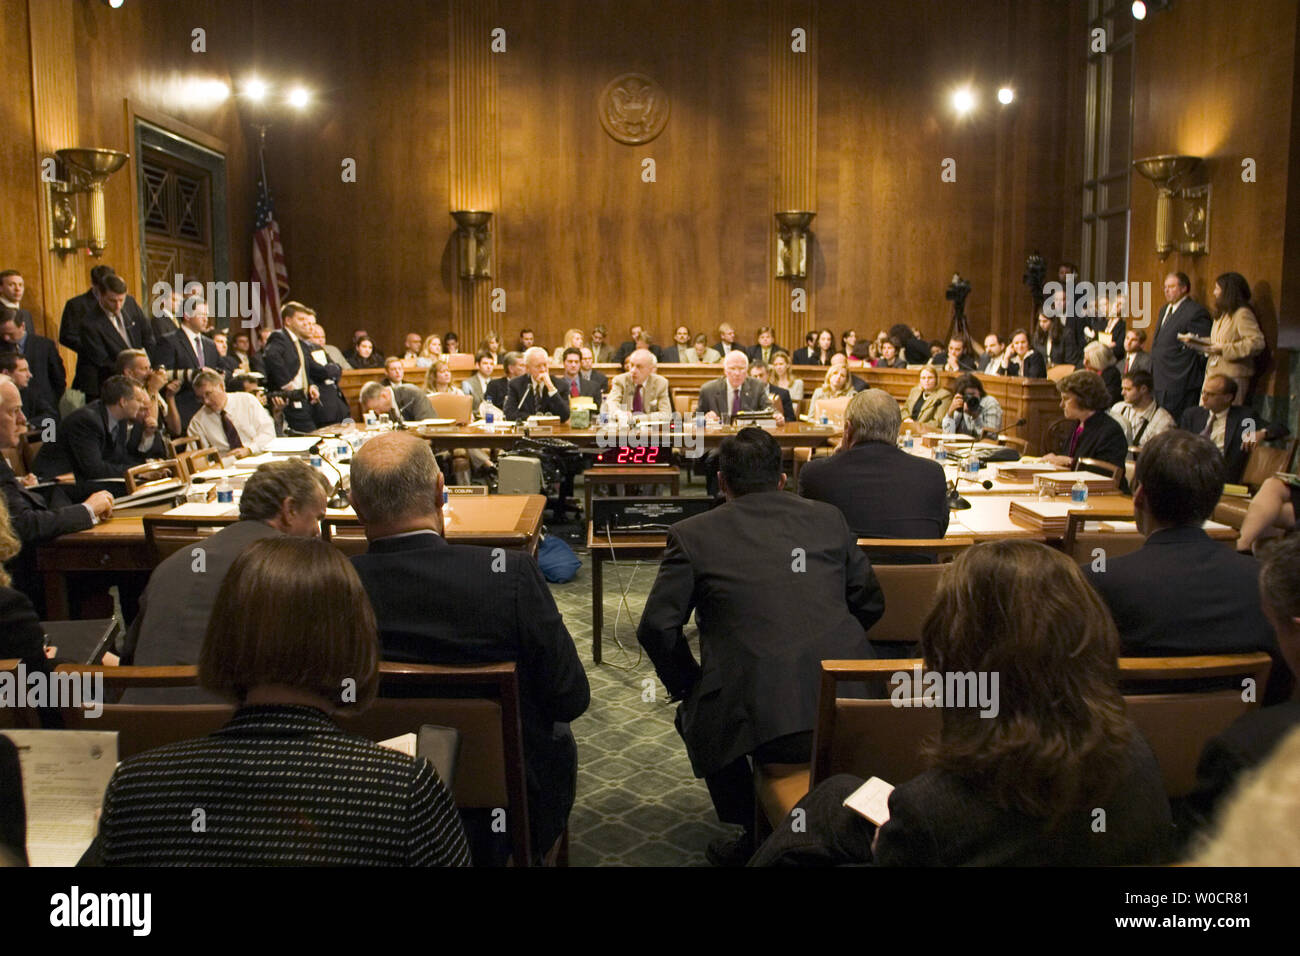 A meeting of the Senate Judiciary Committee on the John Roberts nomination September 22, 2005 in Washington, DC. The full committee is meeting to vote on the nomination of Roberts to be chief justice of the United States Supreme Court. (UPI Photo/Kamenko Pajic) Stock Photo